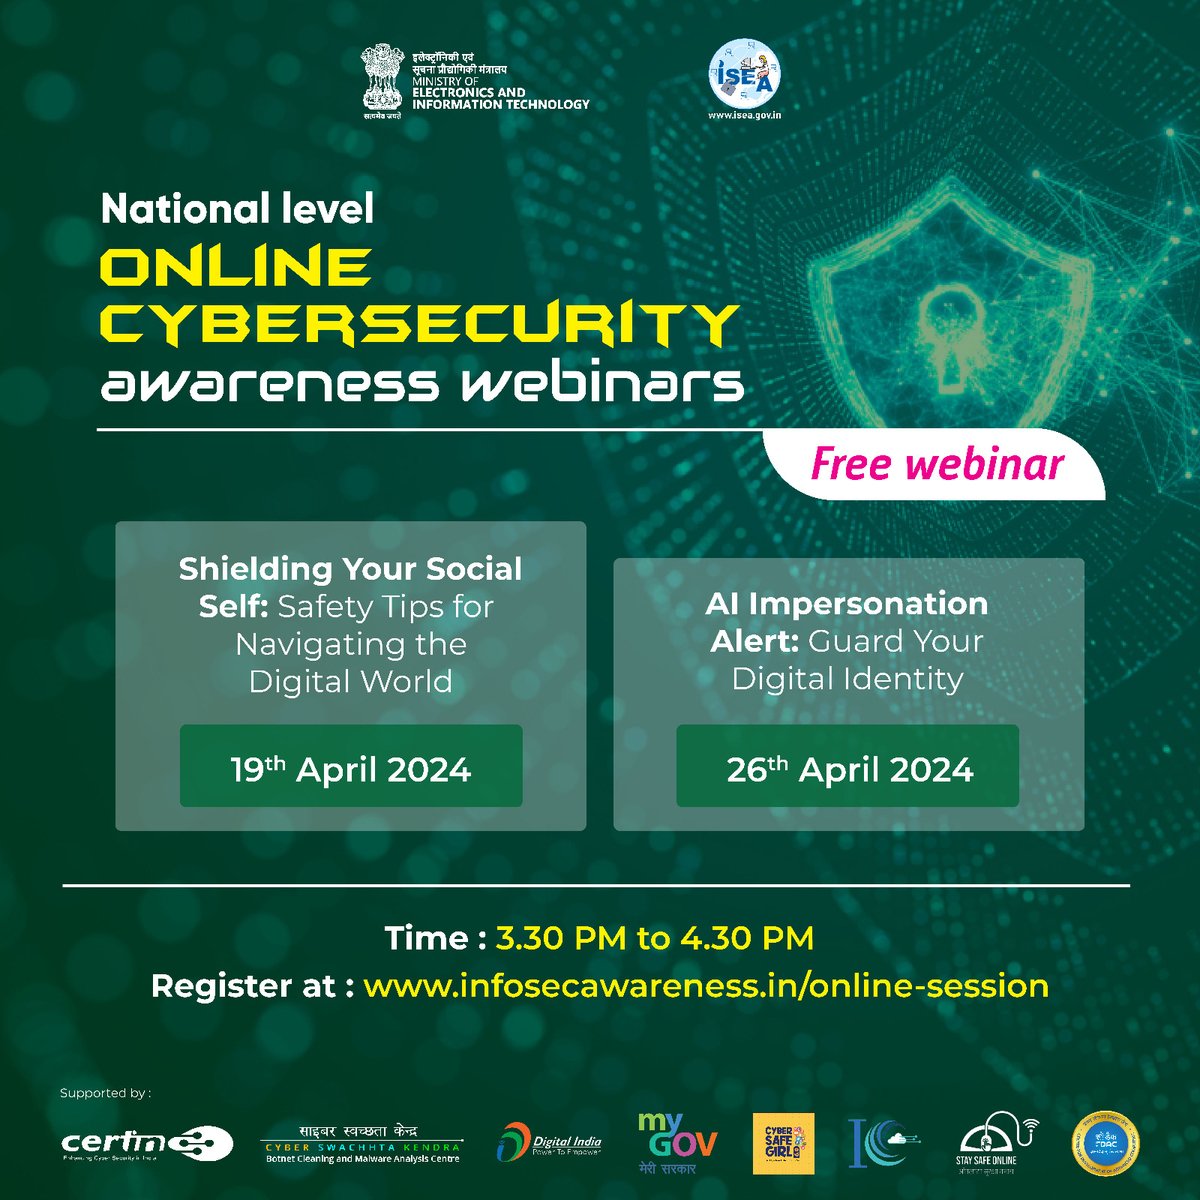 ISEA initiative is hosting a series of National-level cybersecurity online awareness Webinars regularly, covering a spectrum of cybersecurity subjects. Register: infosecawareness.in/online-session Those who complete the quiz will receive a participation certificate.